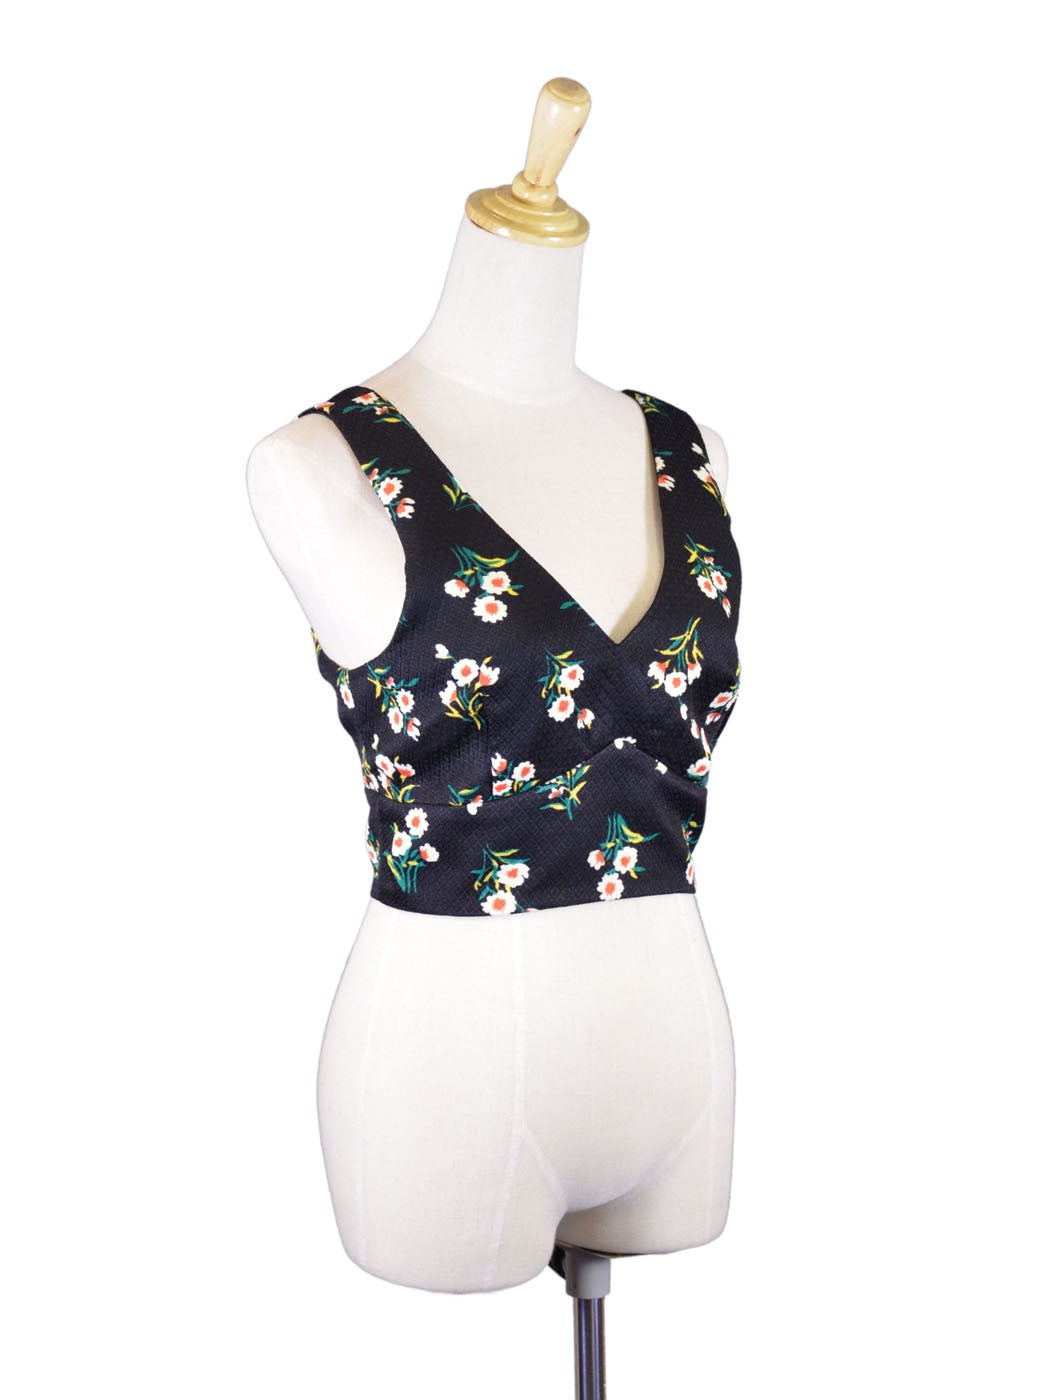 Lush Lovely Cute Oriental Floral Quilt Textured Print V-Neck Cropped Tank Top